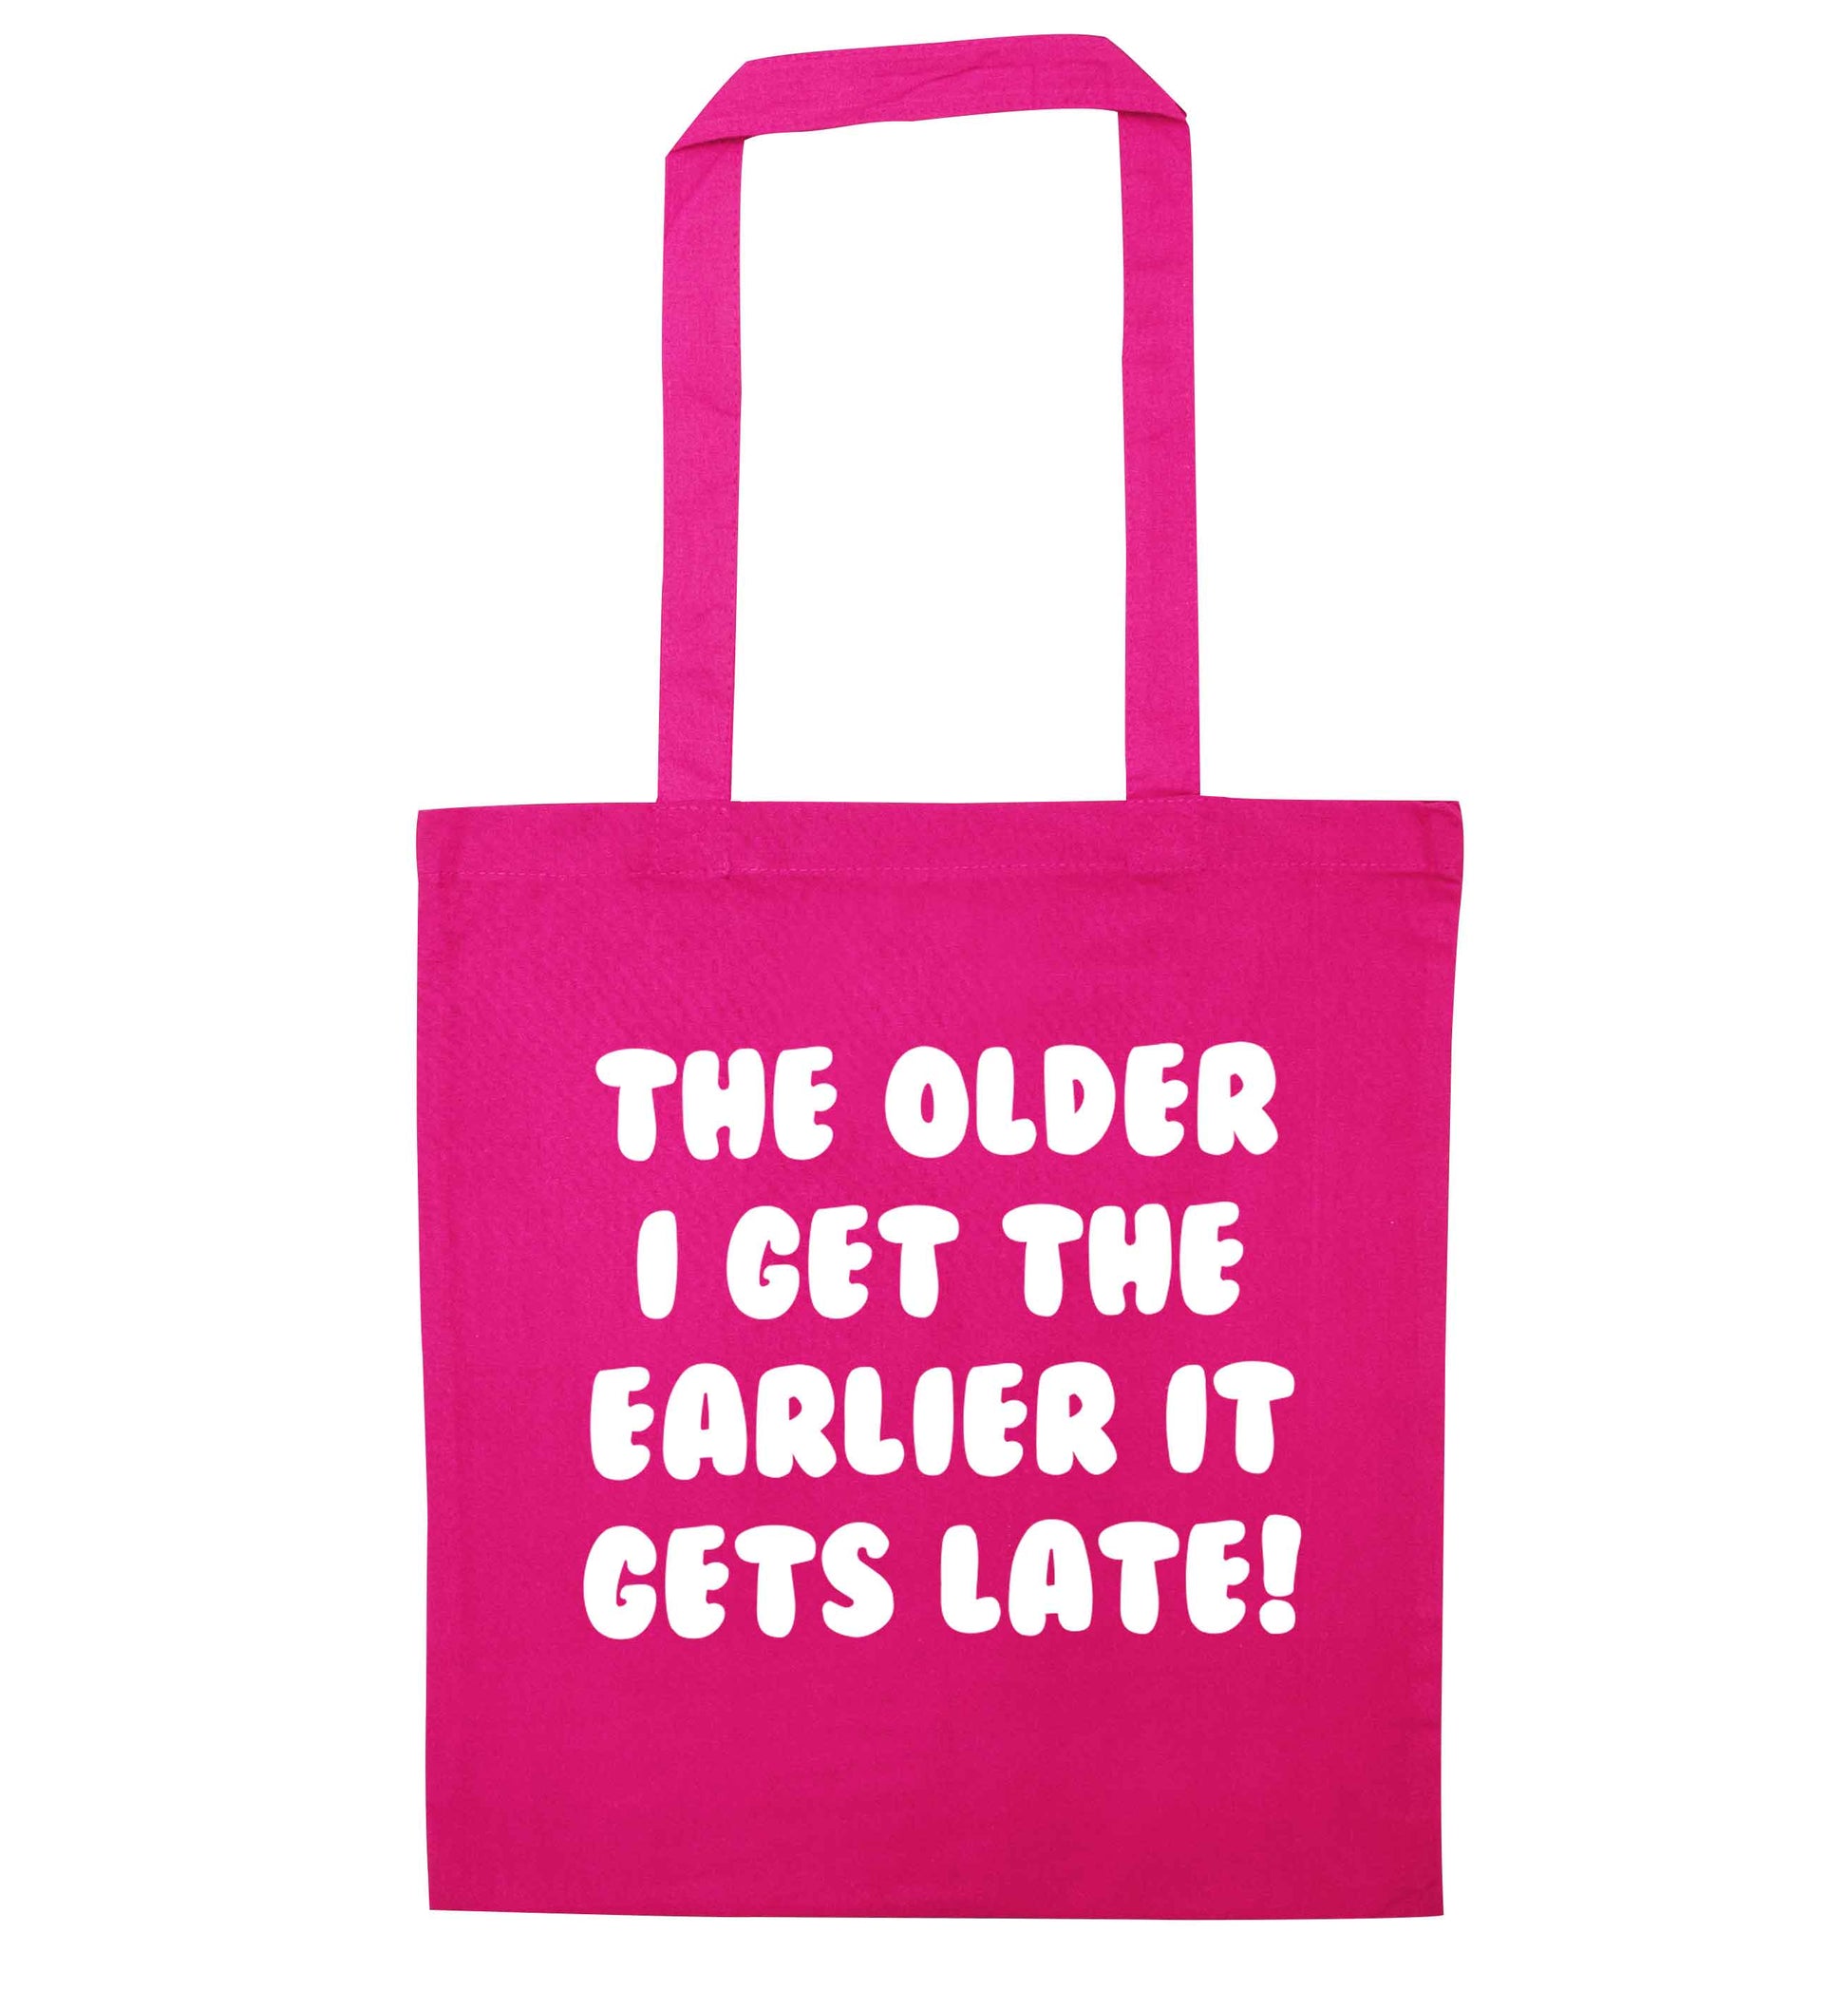 The older I get the earlier it gets late! pink tote bag